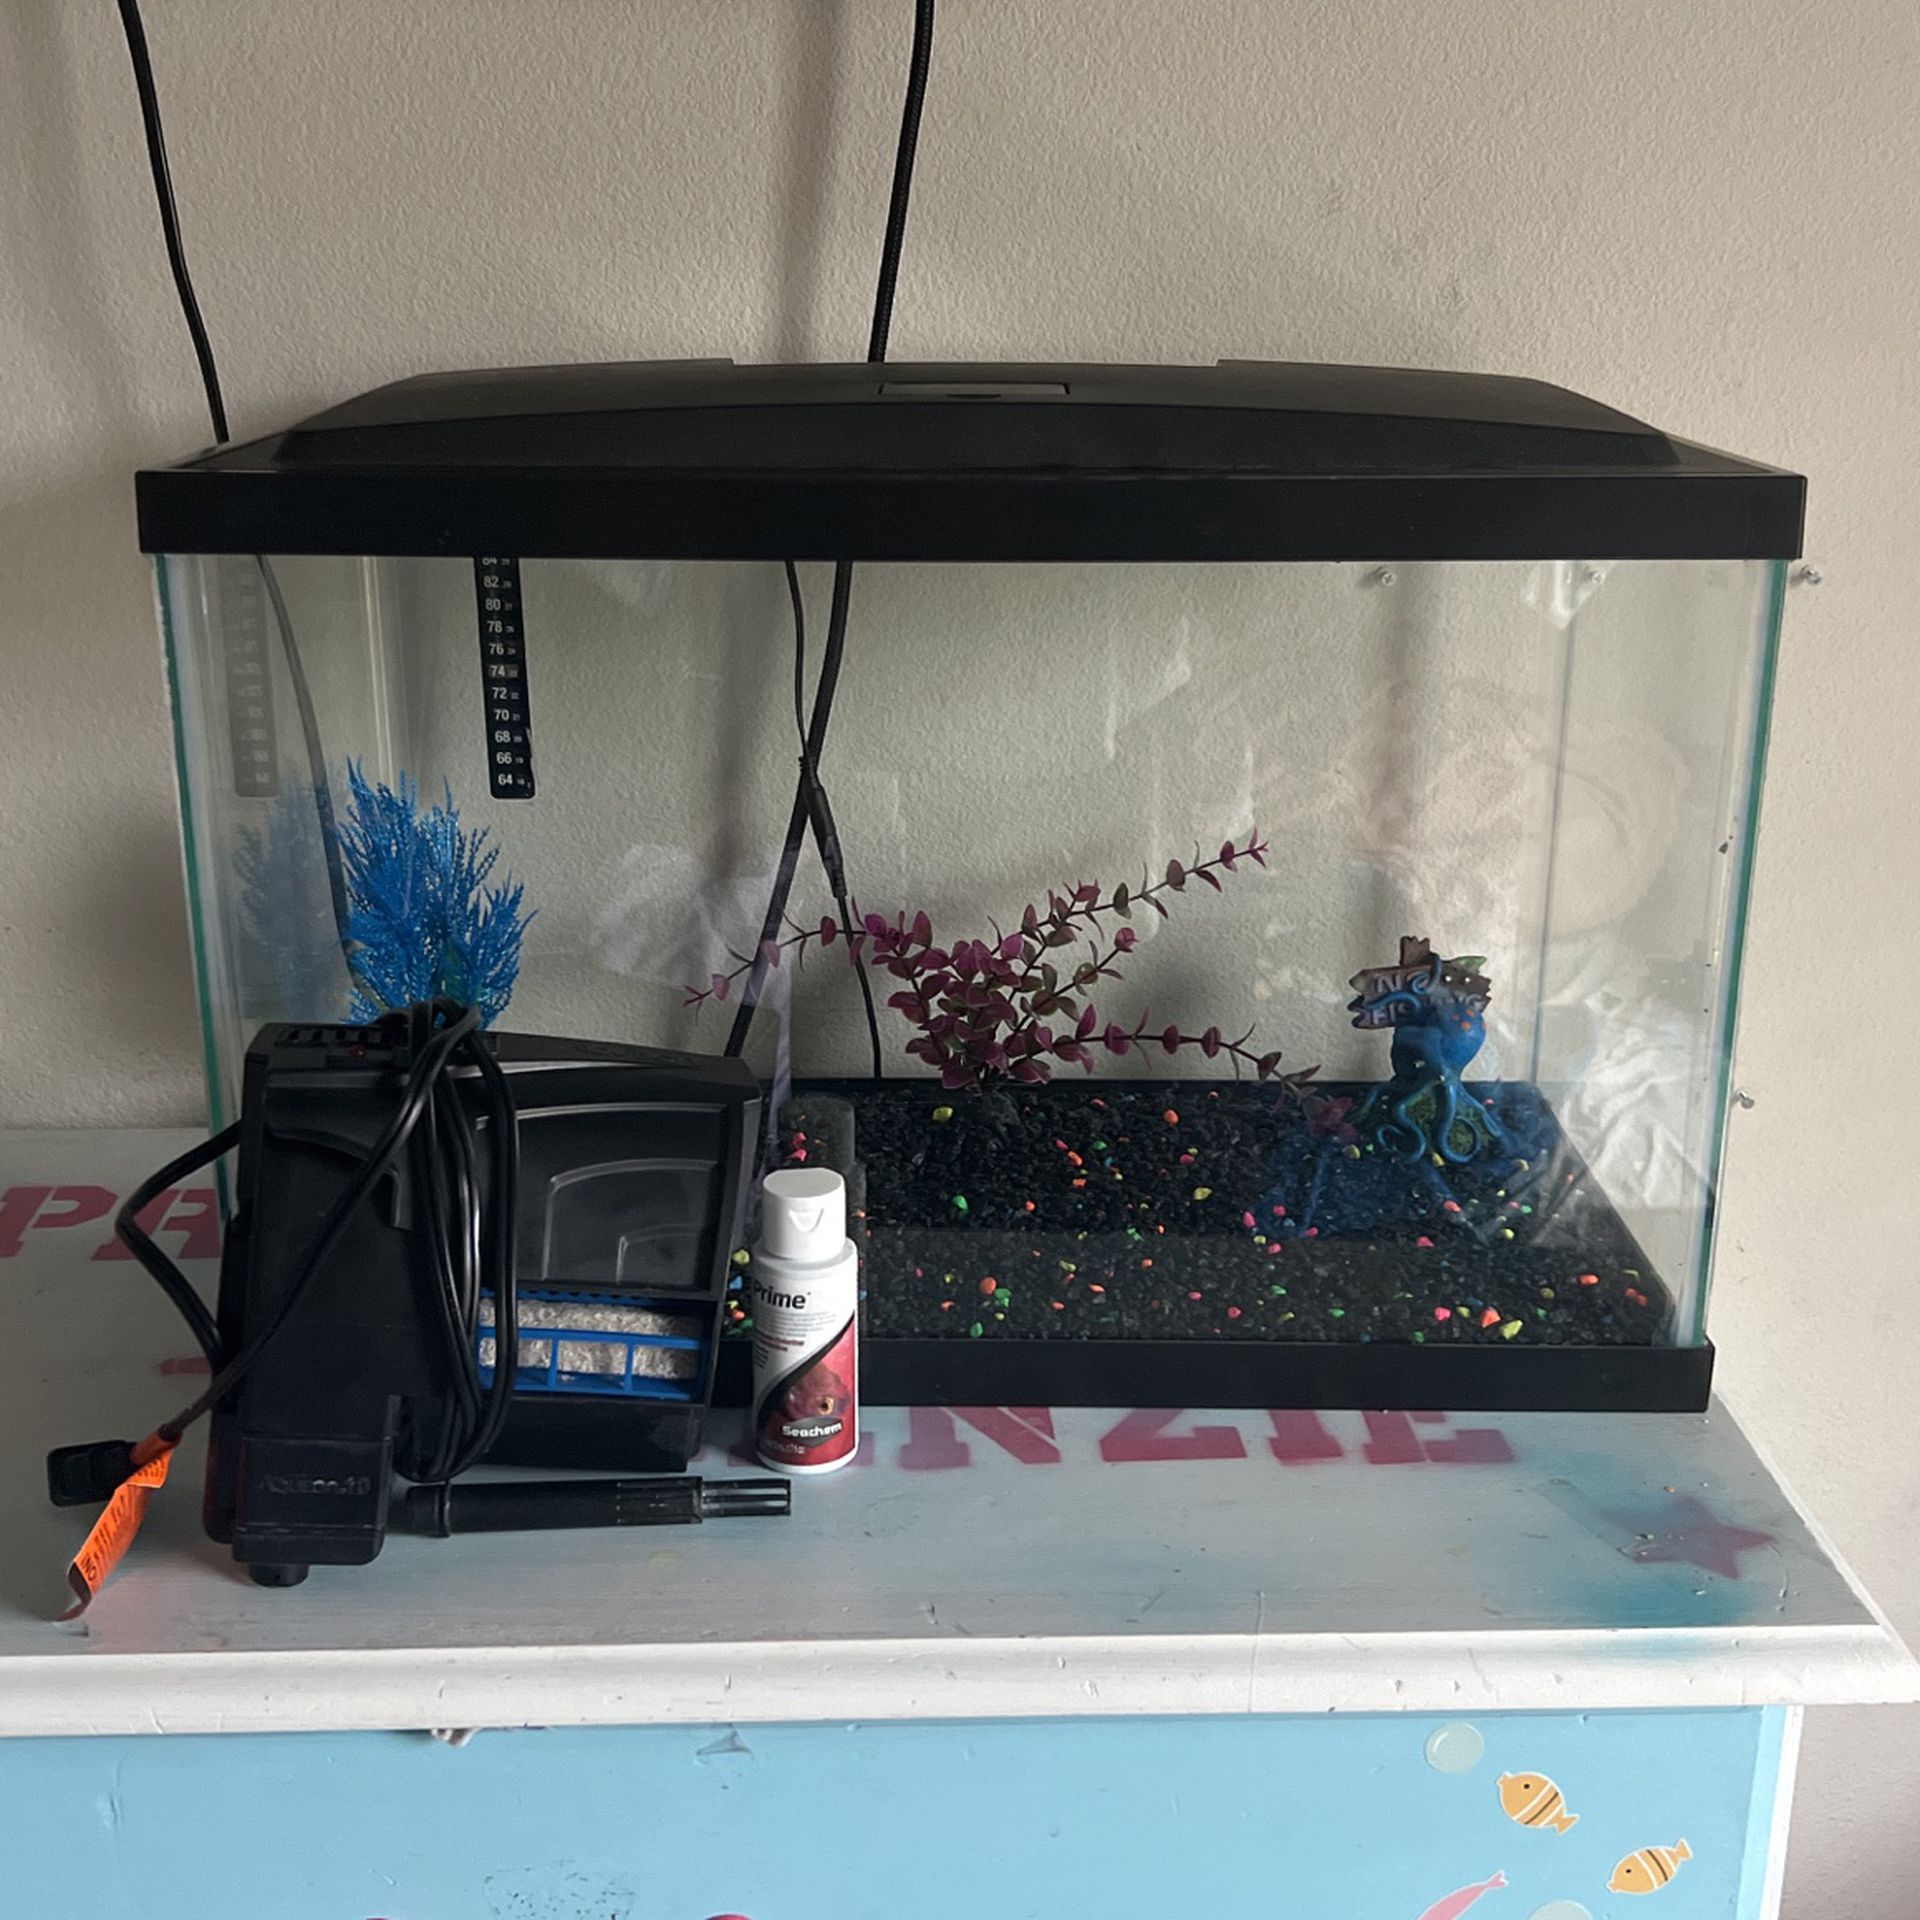 AQUEON 10 Gallon Tank With Filter And Water Conditioner 